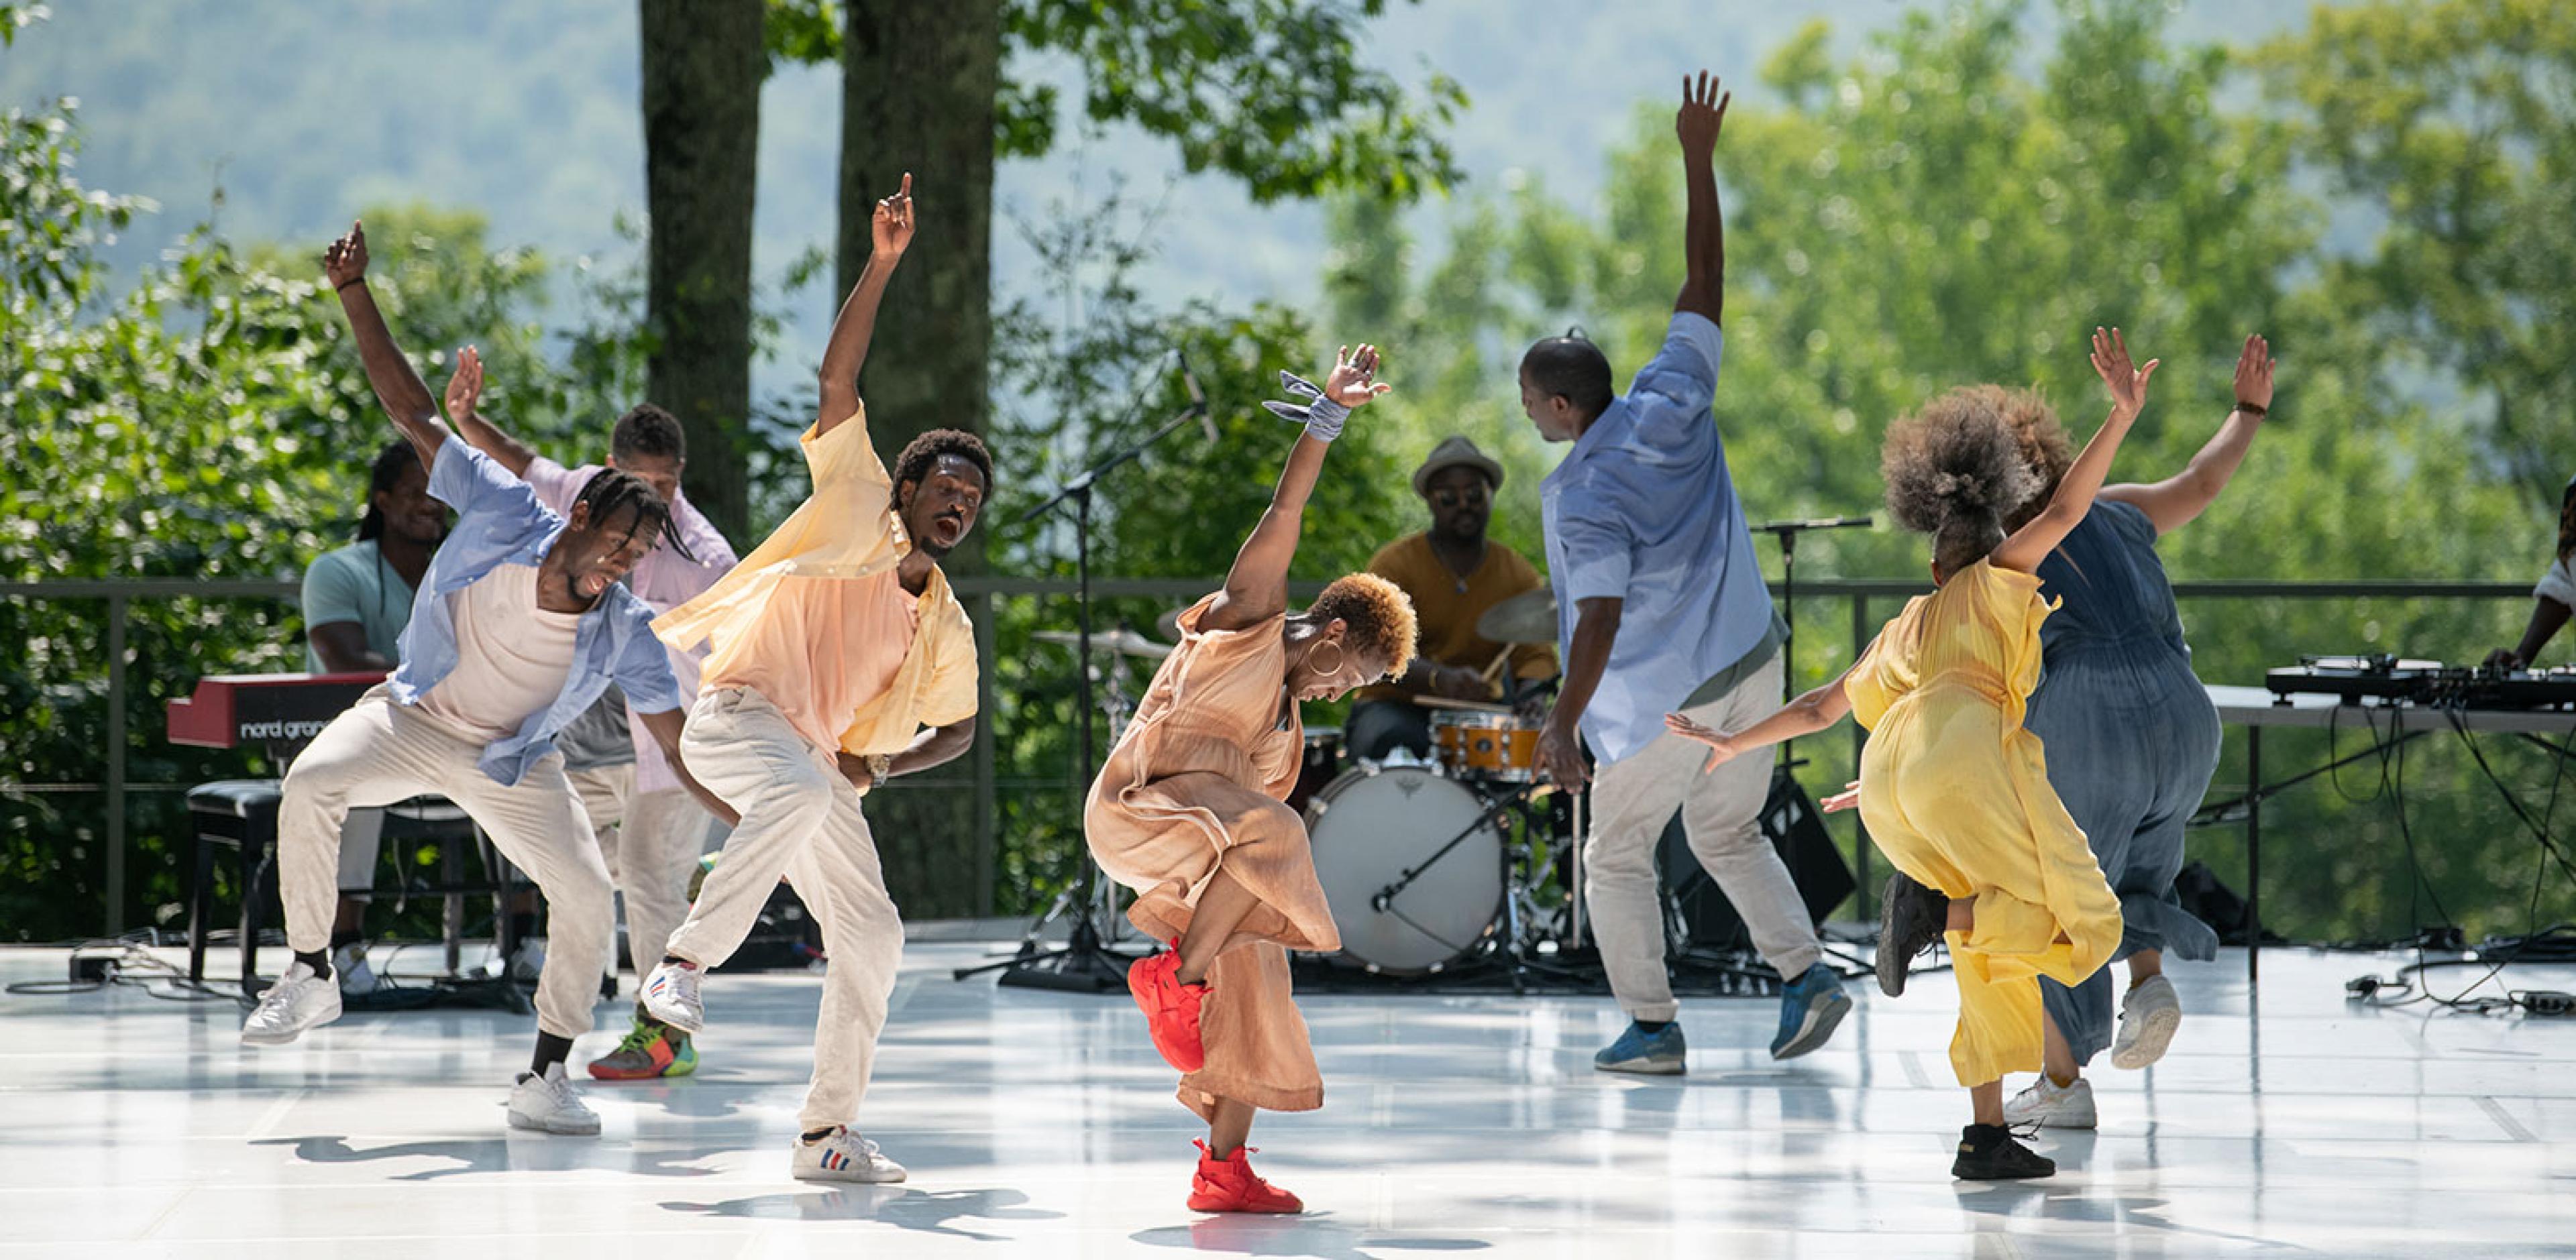 dancers on an outdoor stage with trees in background